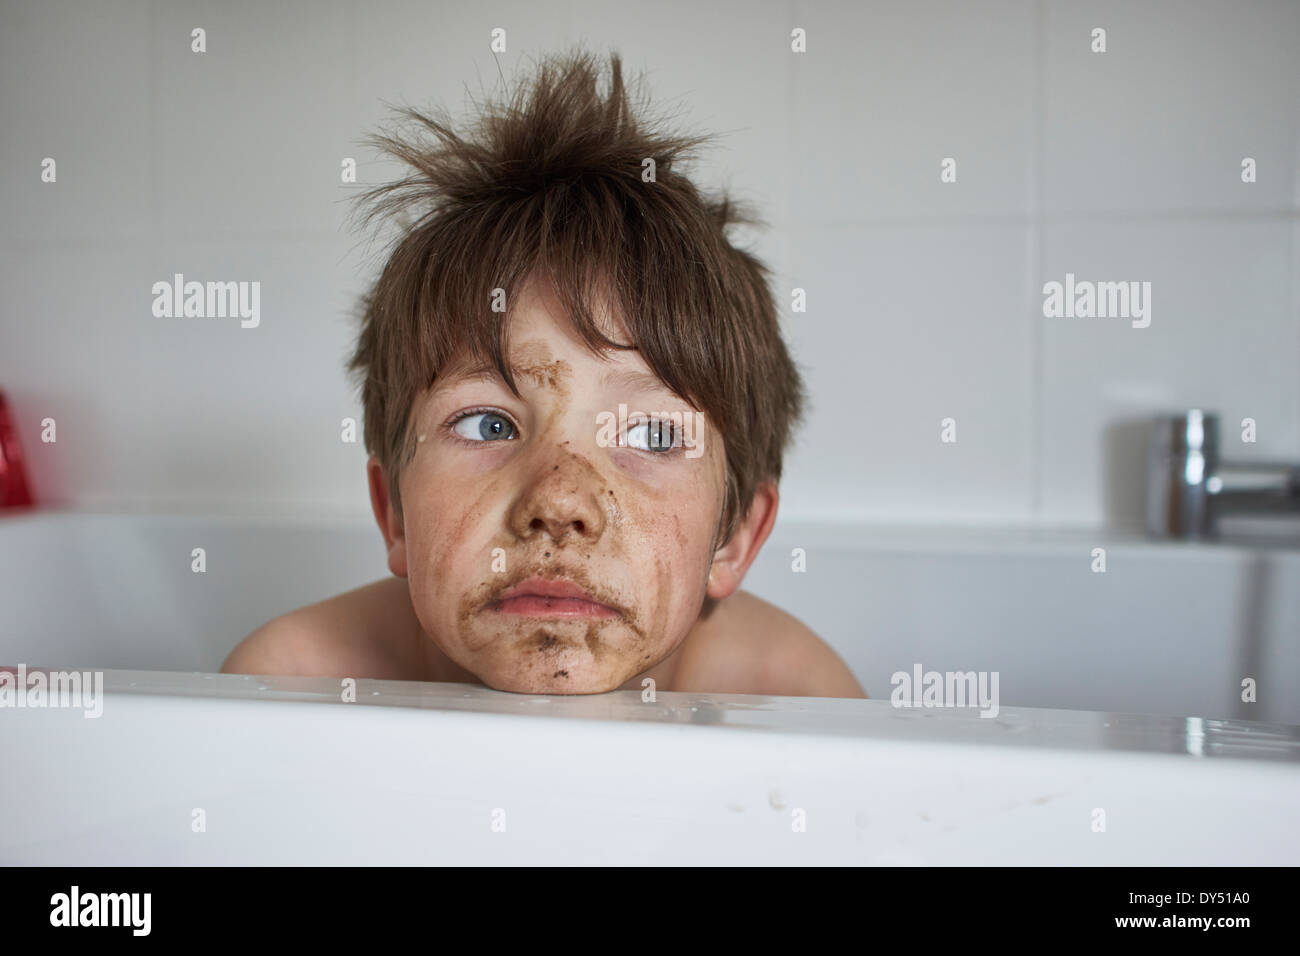 Boy with muddy face, sitting in bath Stock Photo